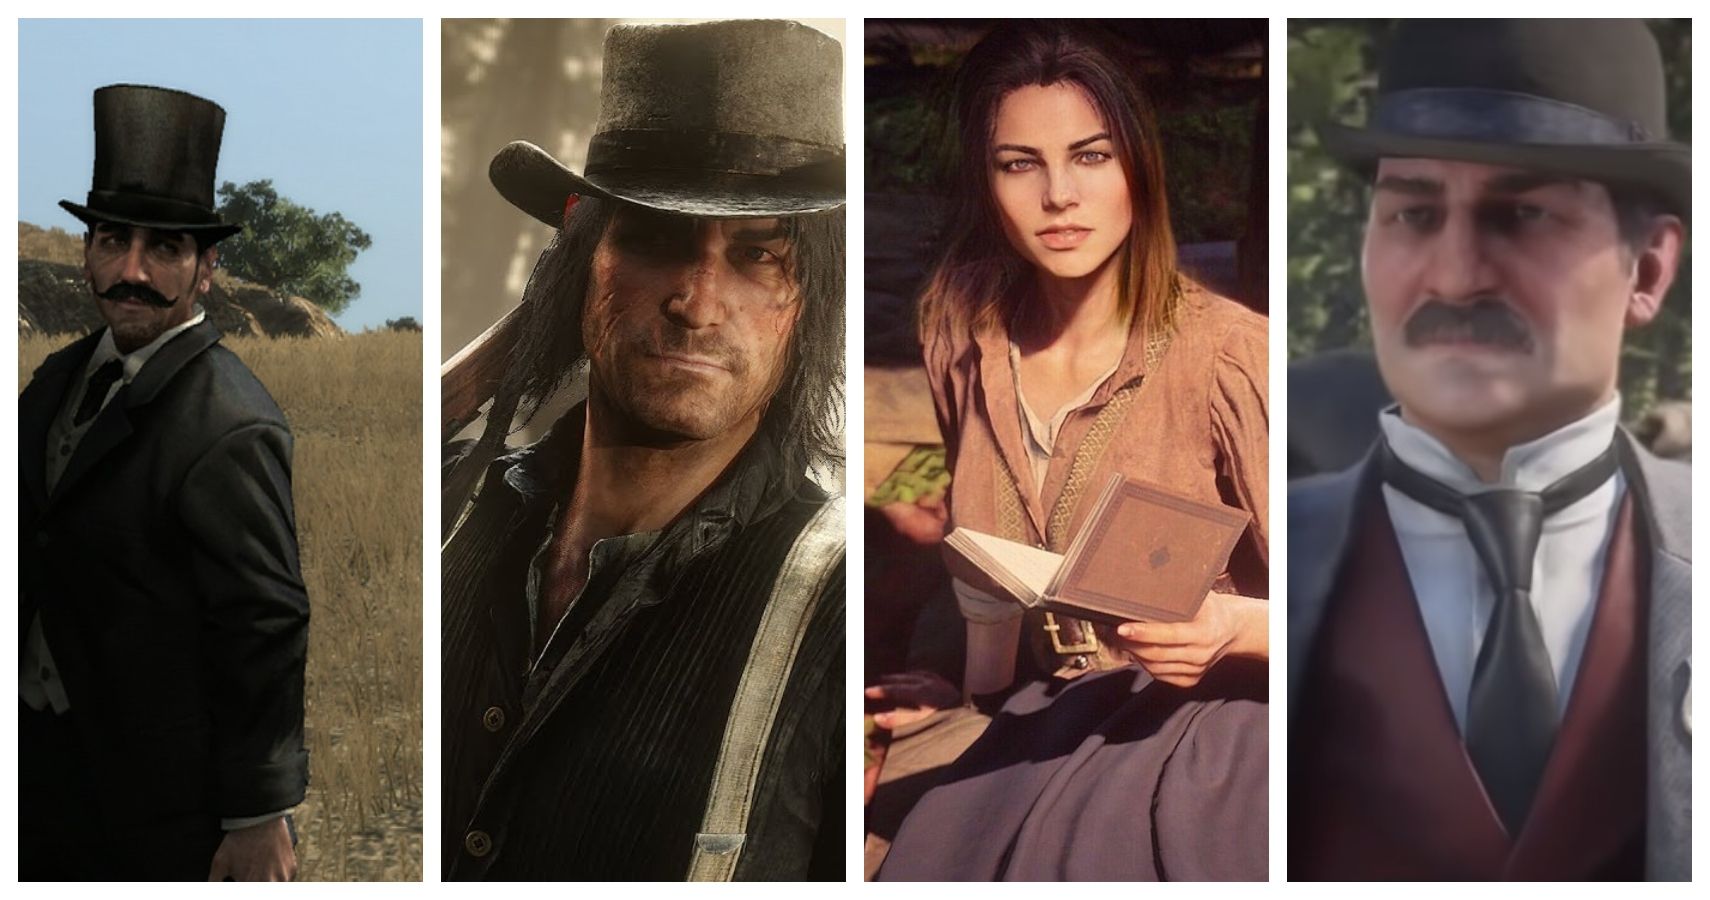 Red Dead Redemption 2's Arthur Morgan is one of gaming's greatest  protagonists, fans agree